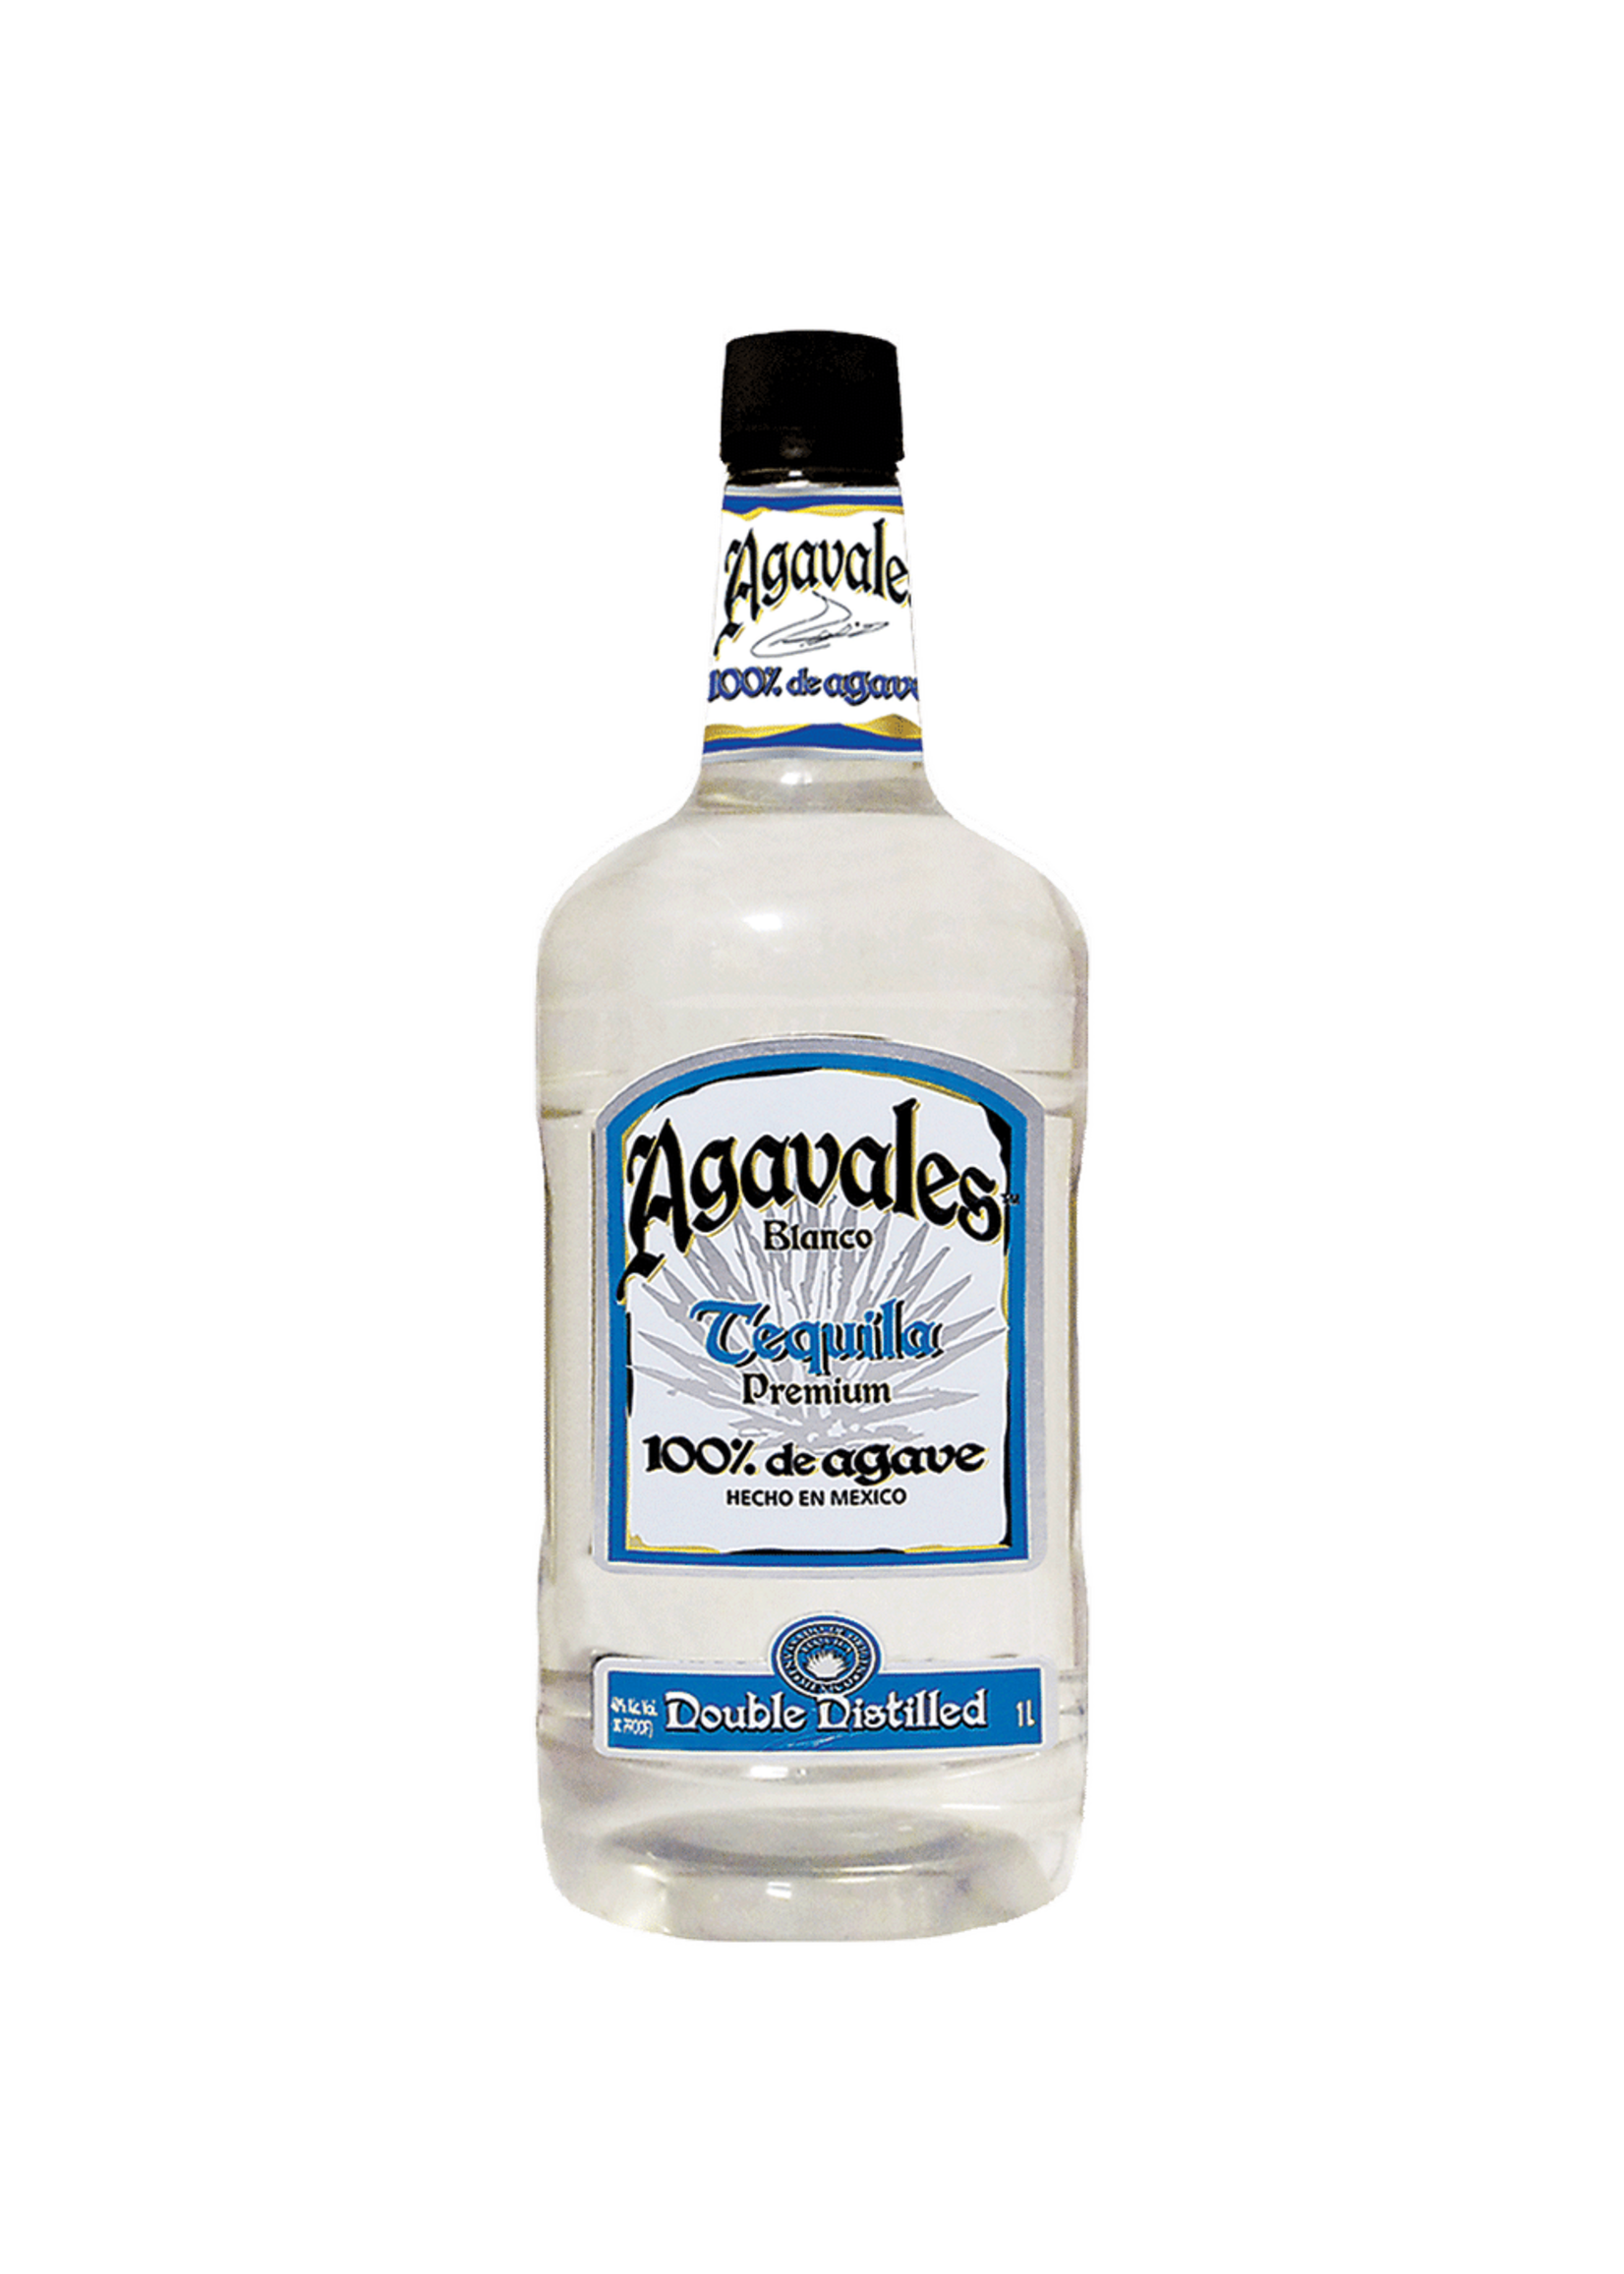 AGAVALES SILVER TEQUILA 80Proof 1.75 Ltr